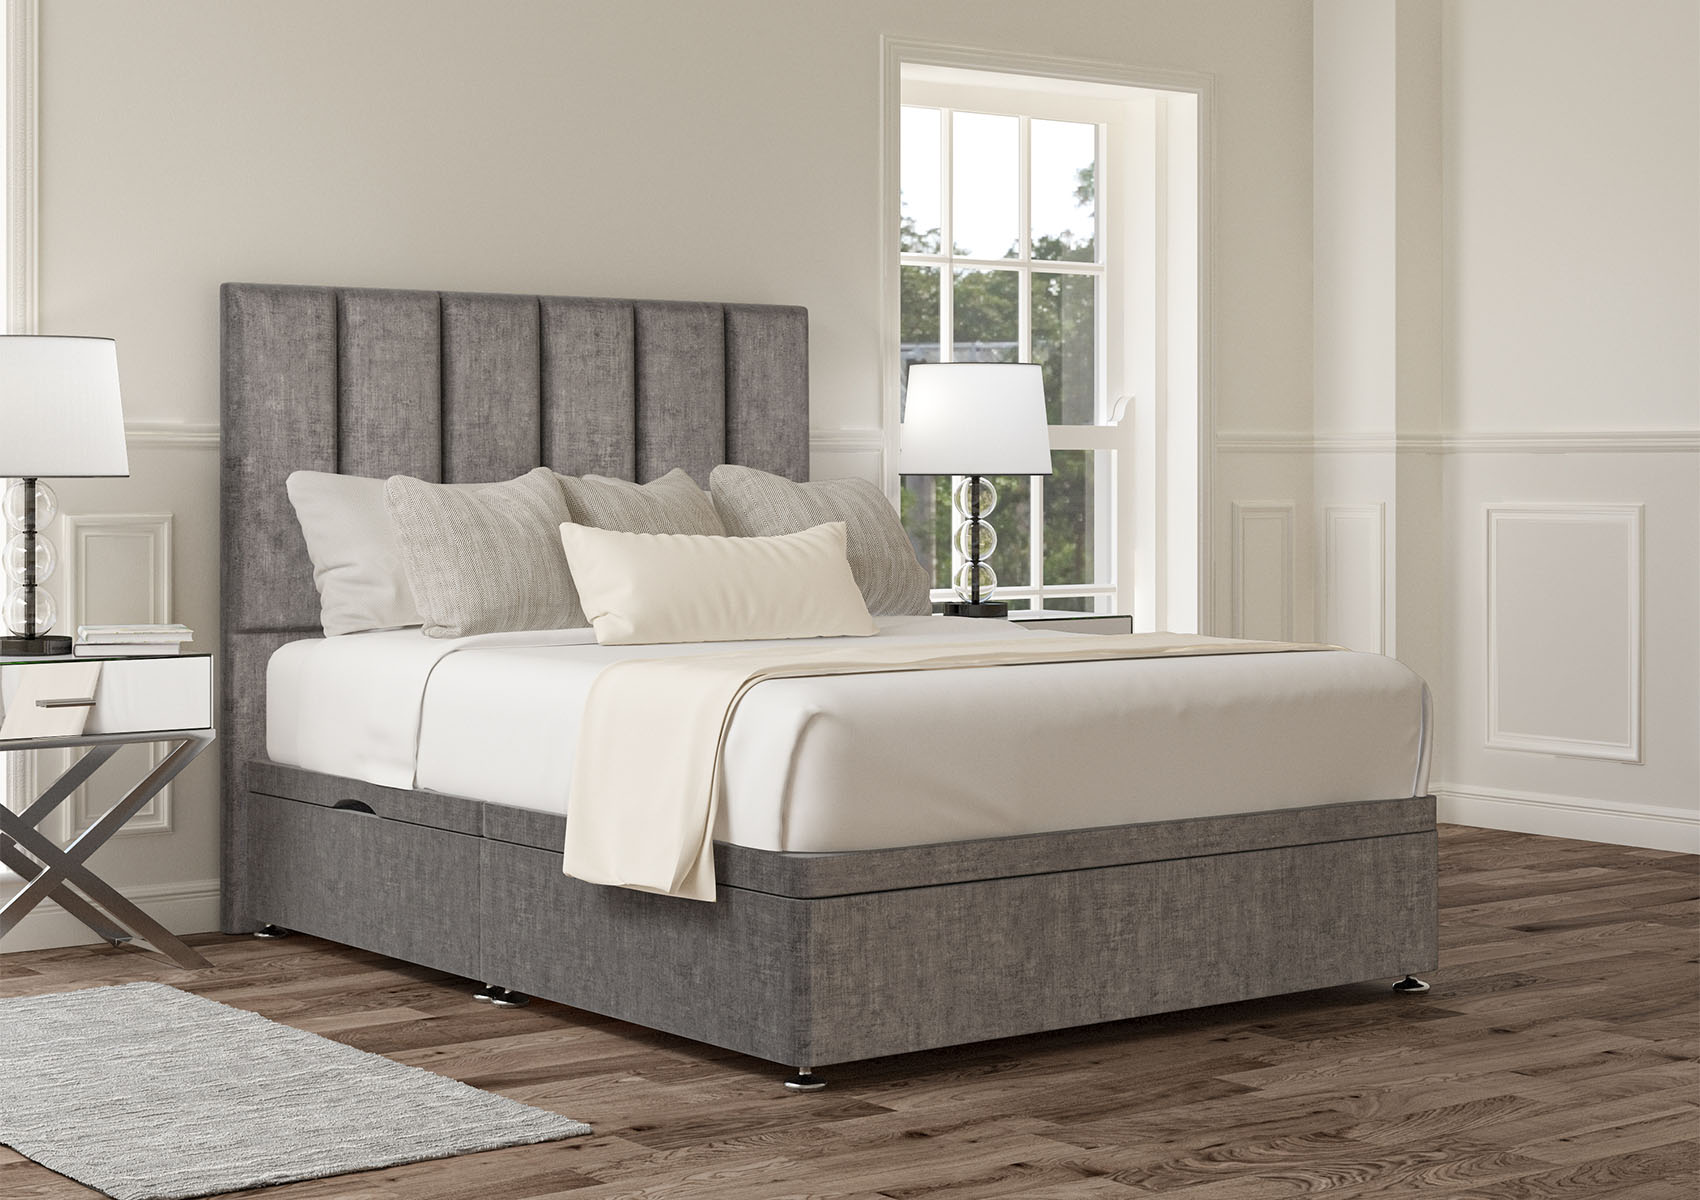 View Empire Arlington Ice Upholstered Double Ottoman Bed Time4Sleep information